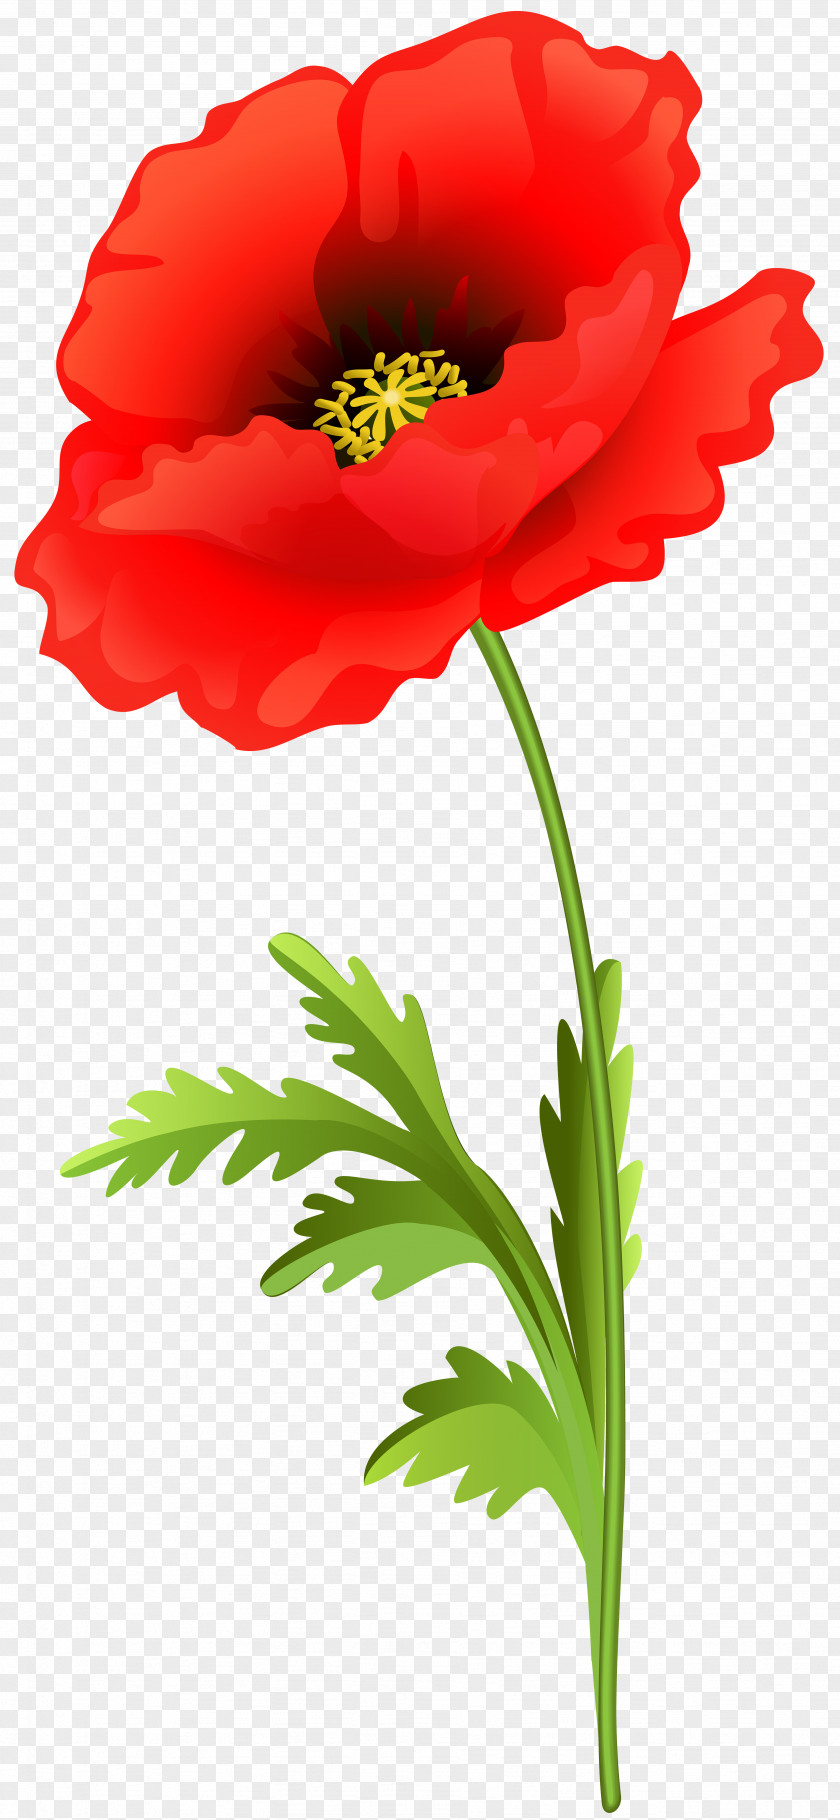 Poppy Clip Art Image Vector Graphics PNG